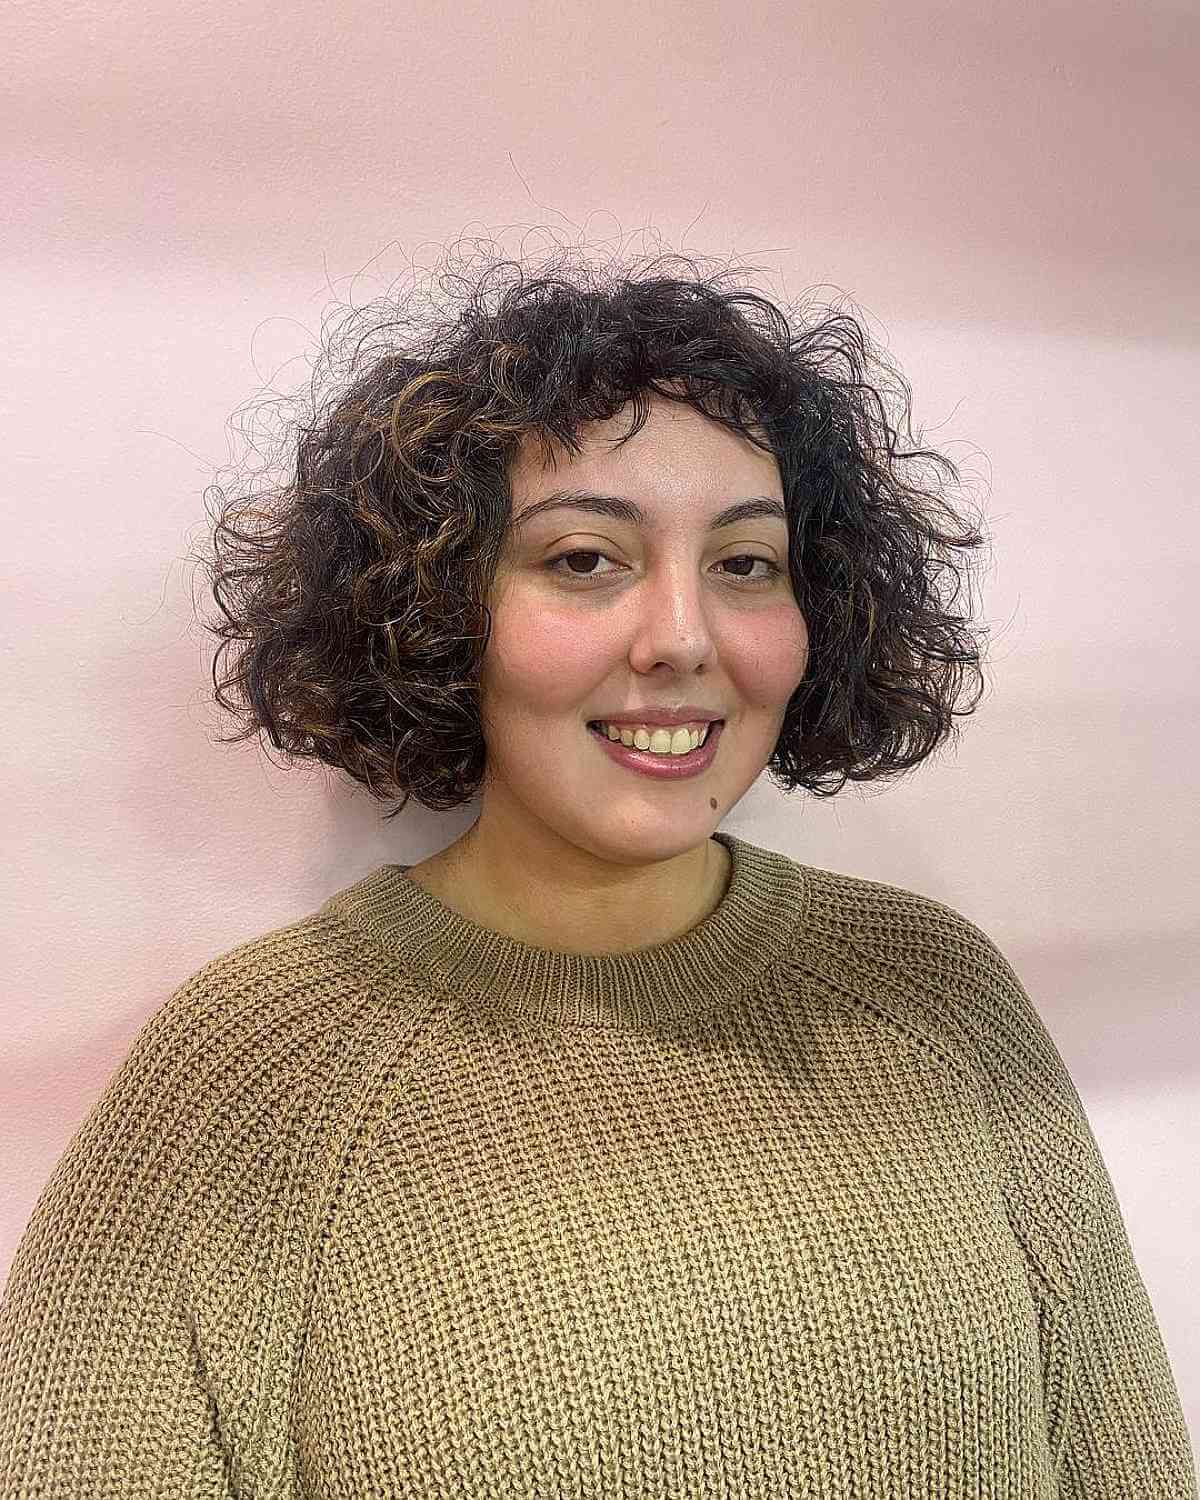 Short choppy hair with frizzy curls and micro bangs